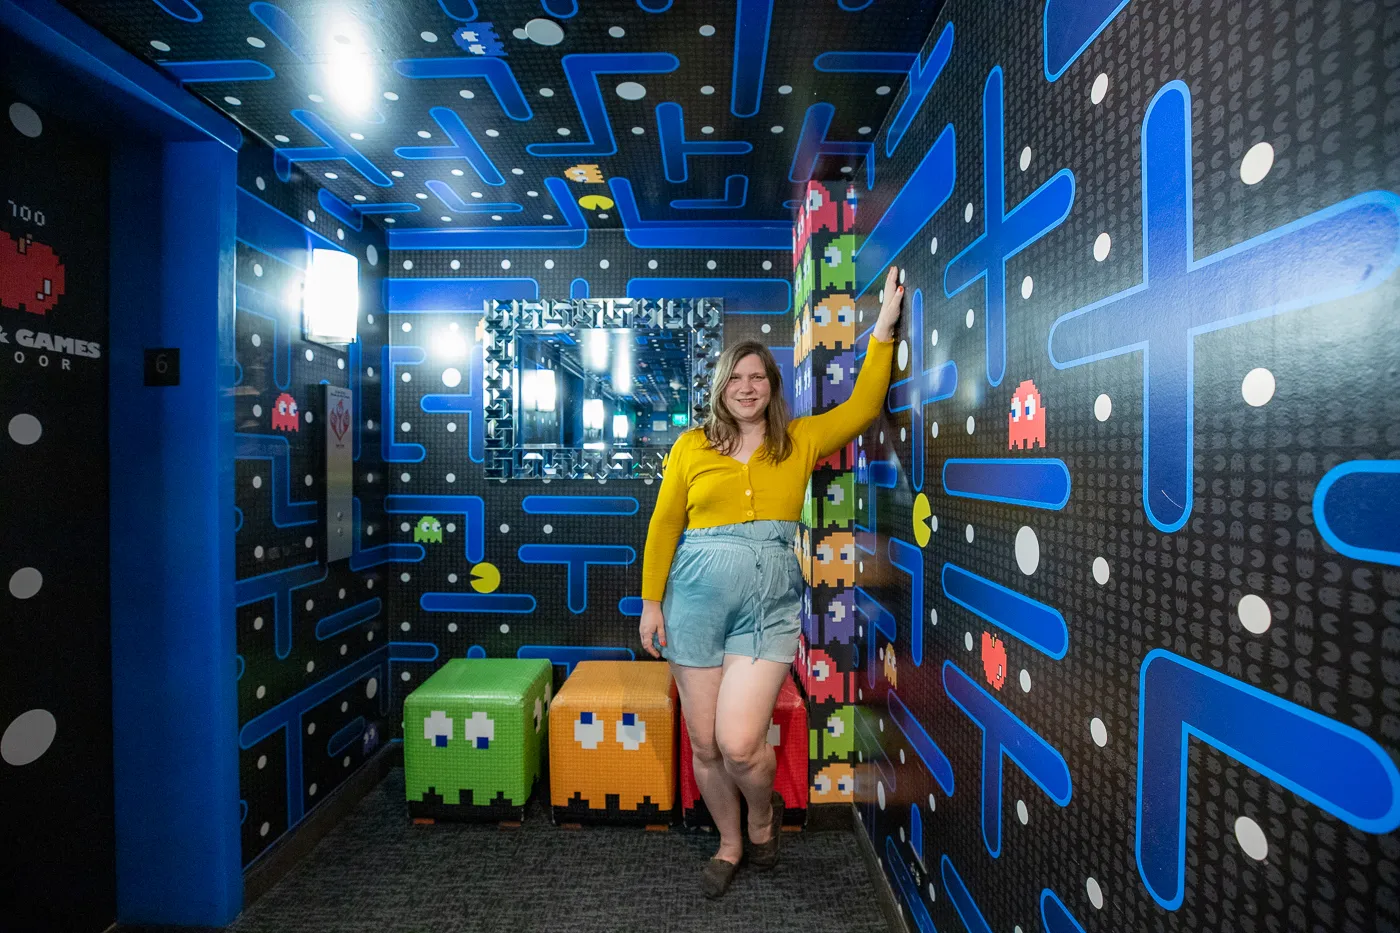 Fun and Games Floor - PacMan wallpaper at The Curtis Hotel - a Themed Hotel in Denver, Colorado